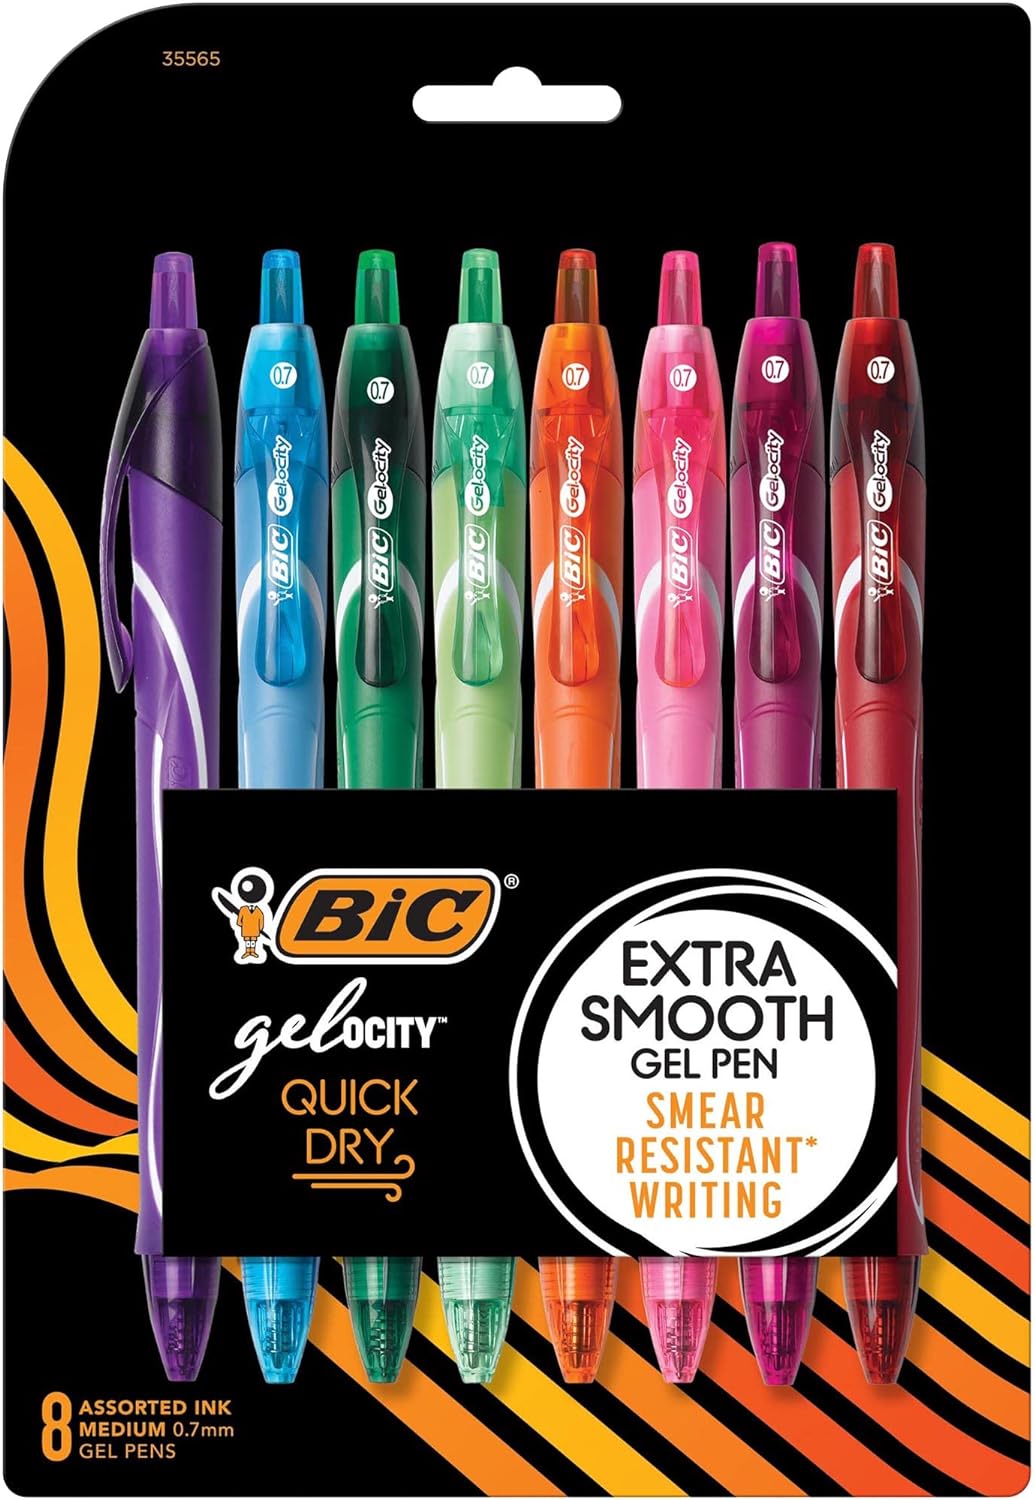 BIC Gel-ocity Quick Dry Fashion Retractable Gel Pens, Medium Point (0.7mm), 8-Count Colored Pens With Full-Length Grip, Colors and Packaging May Vary (RGLCGAP81-AST)